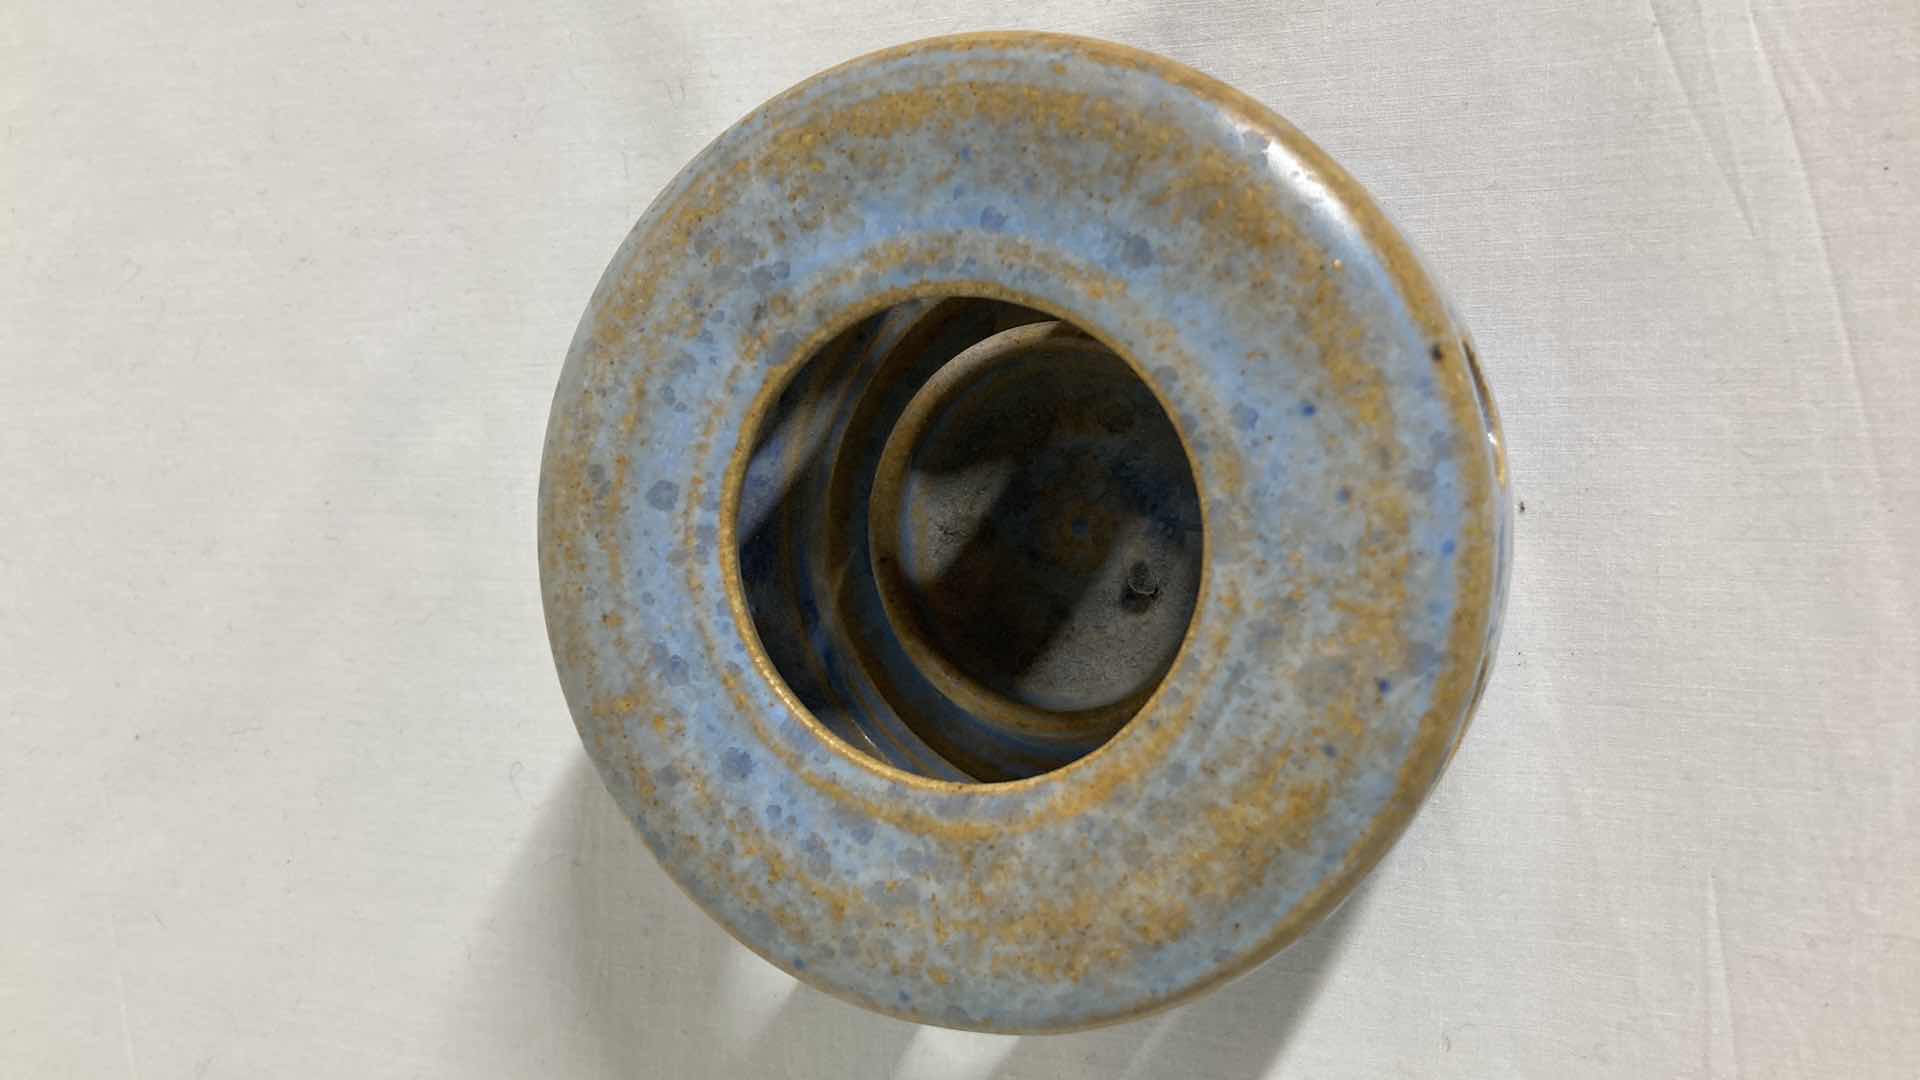 Photo 3 of HAND PAINTED CERAMIC CANDLE HOLDER 4.75” X 2.75”